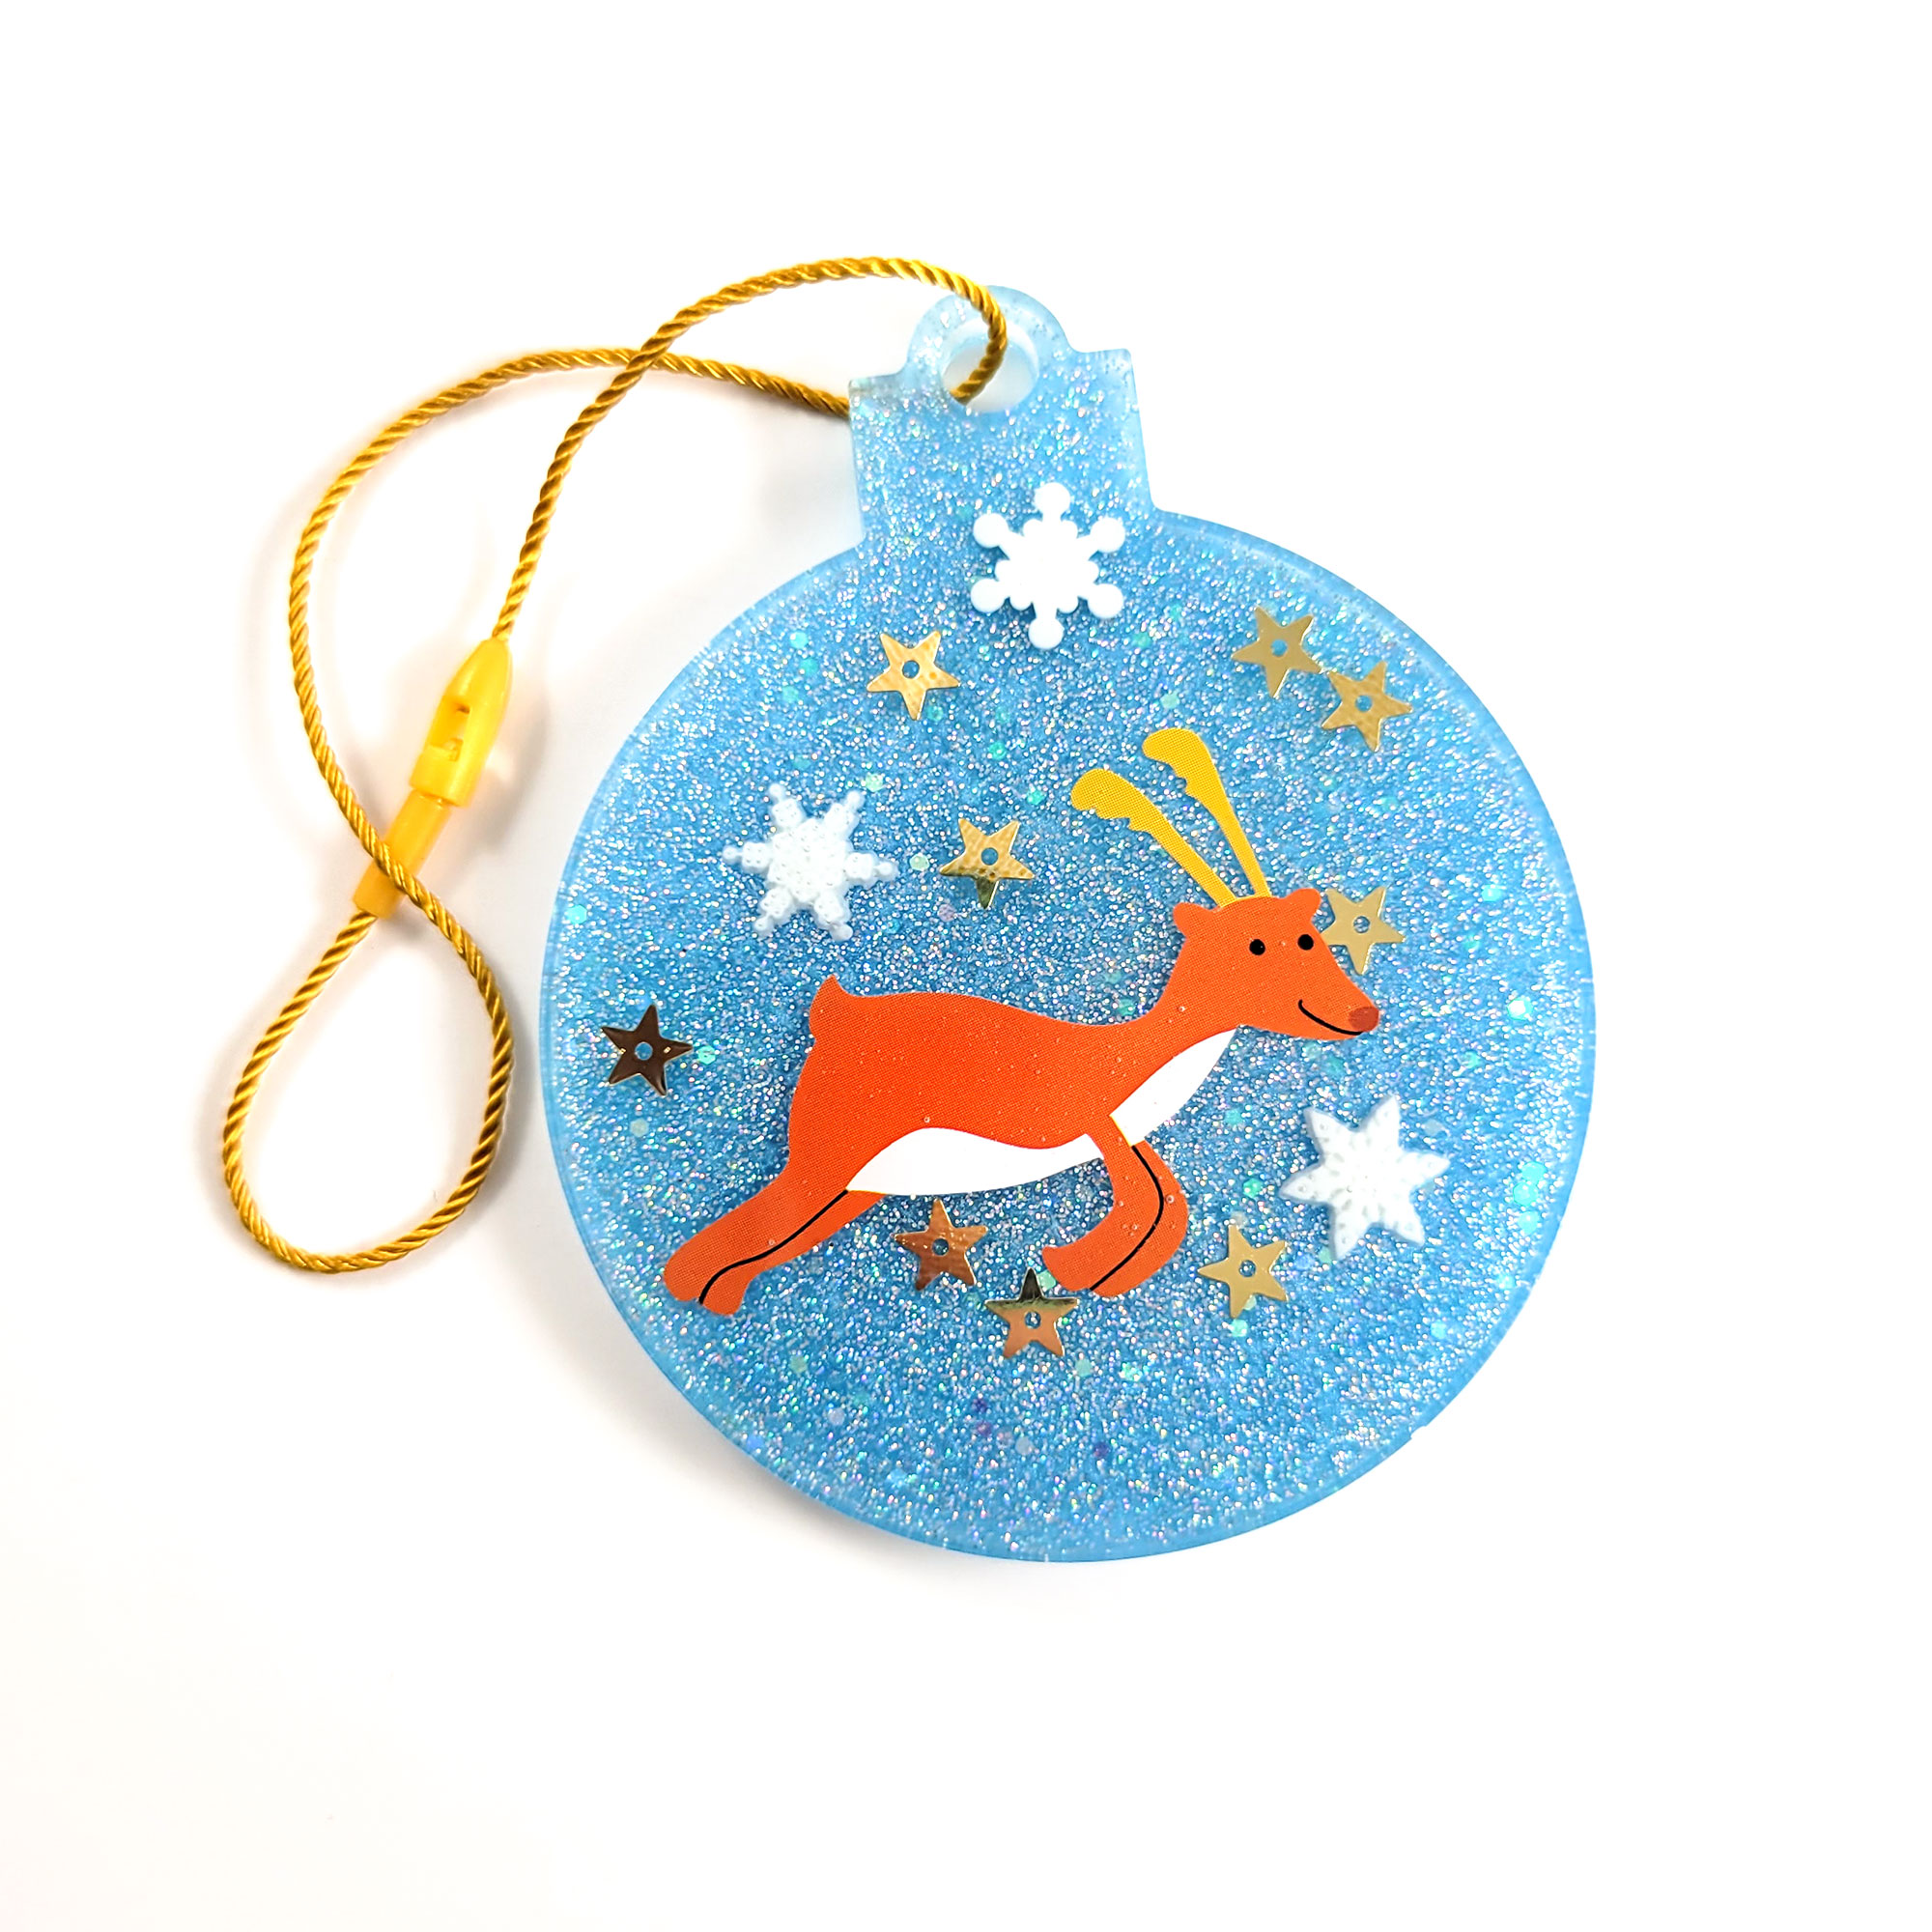 Festive Round Ornaments by Wilde Designs